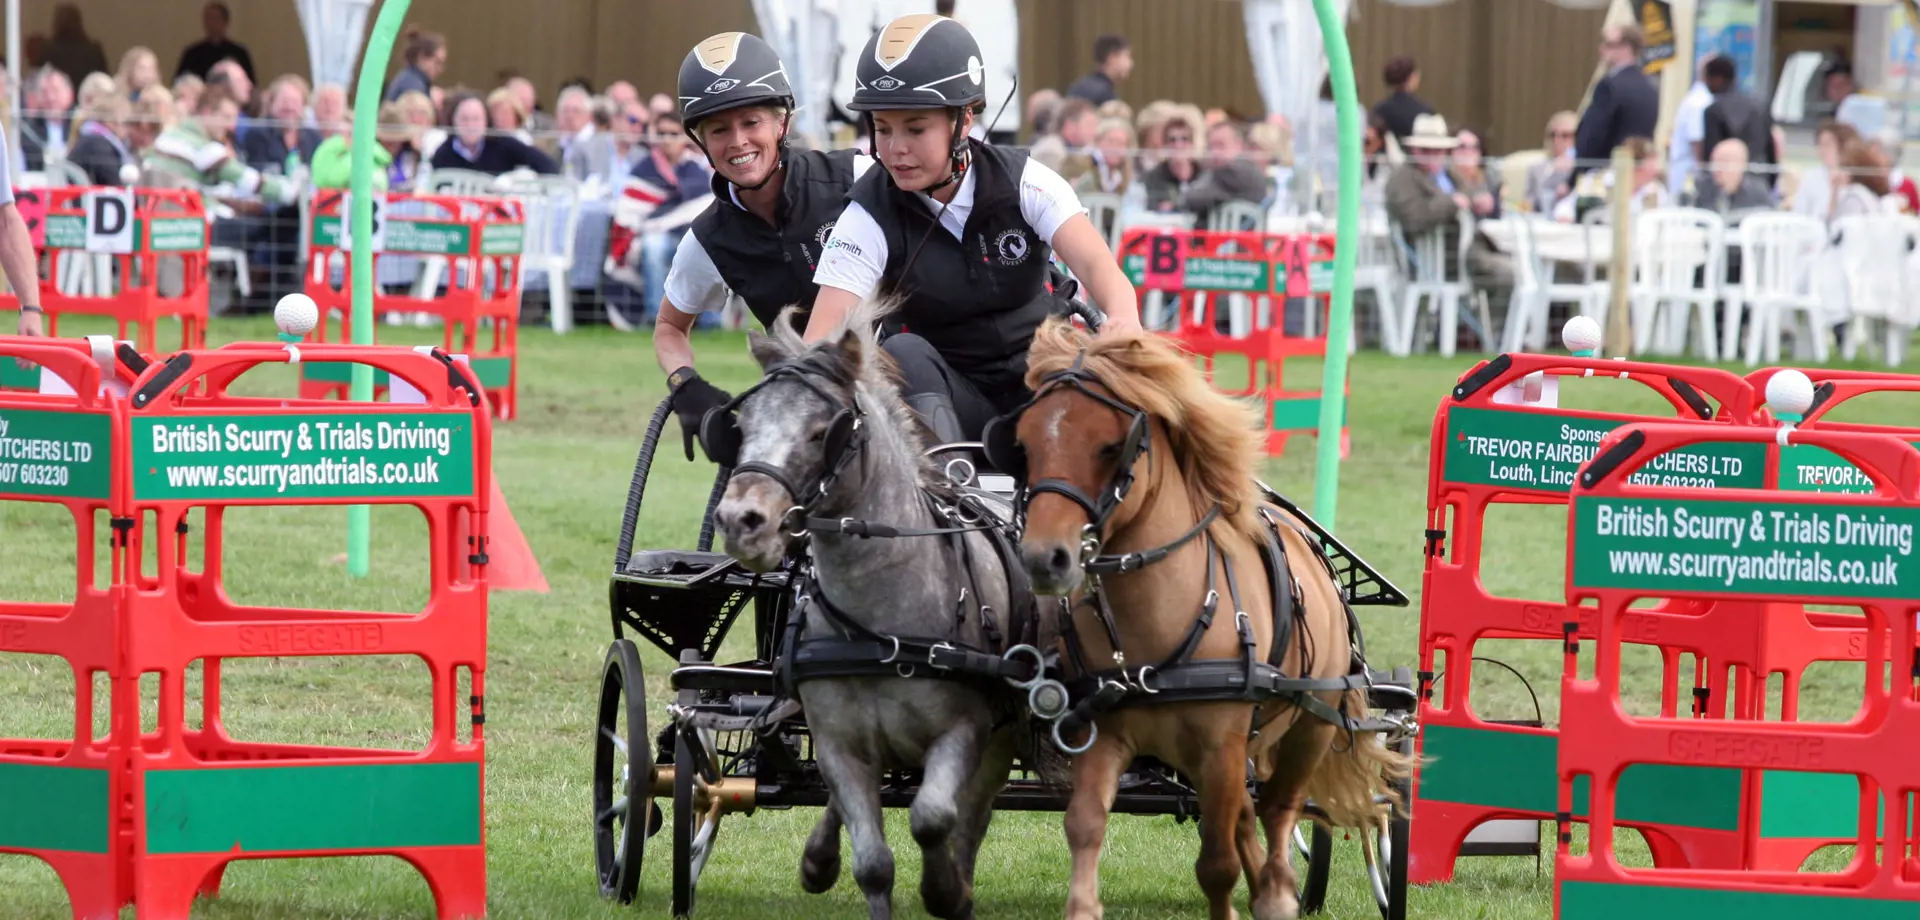 British scurry and trials driving